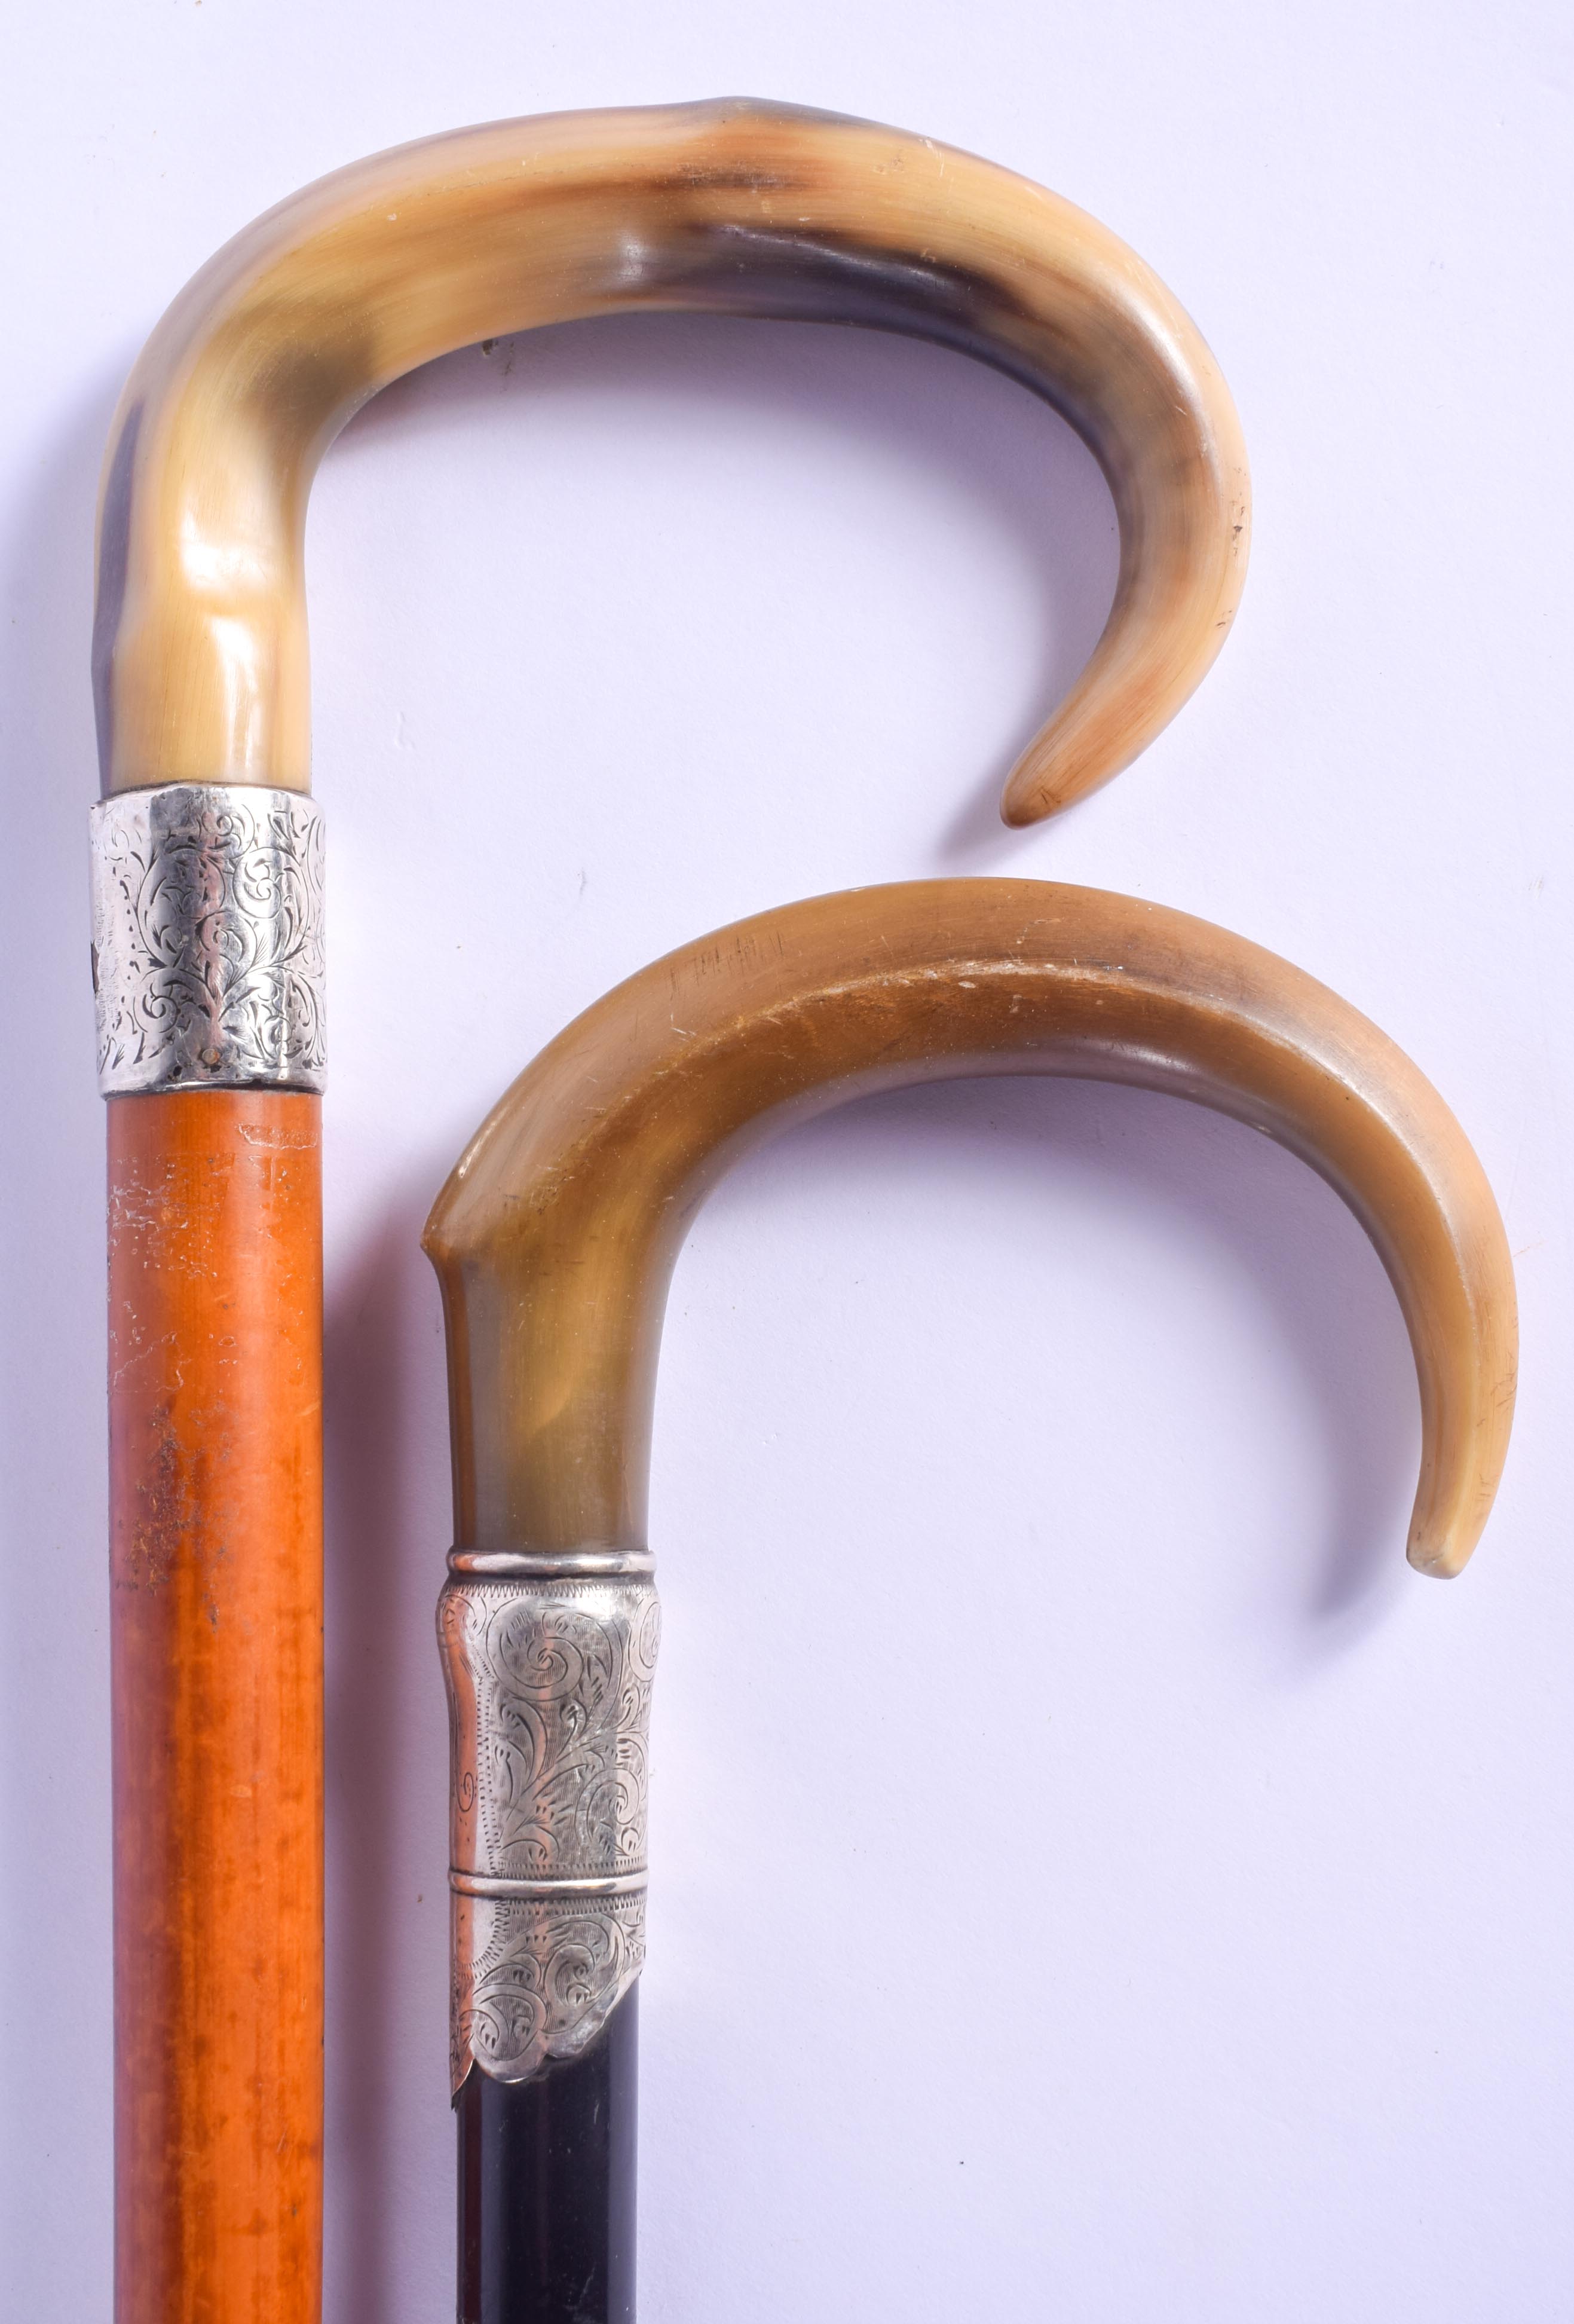 TWO 19TH CENTURY BUFFALO HORN HANDLED WALKING CANES. 88 cm long. (2) - Image 2 of 5